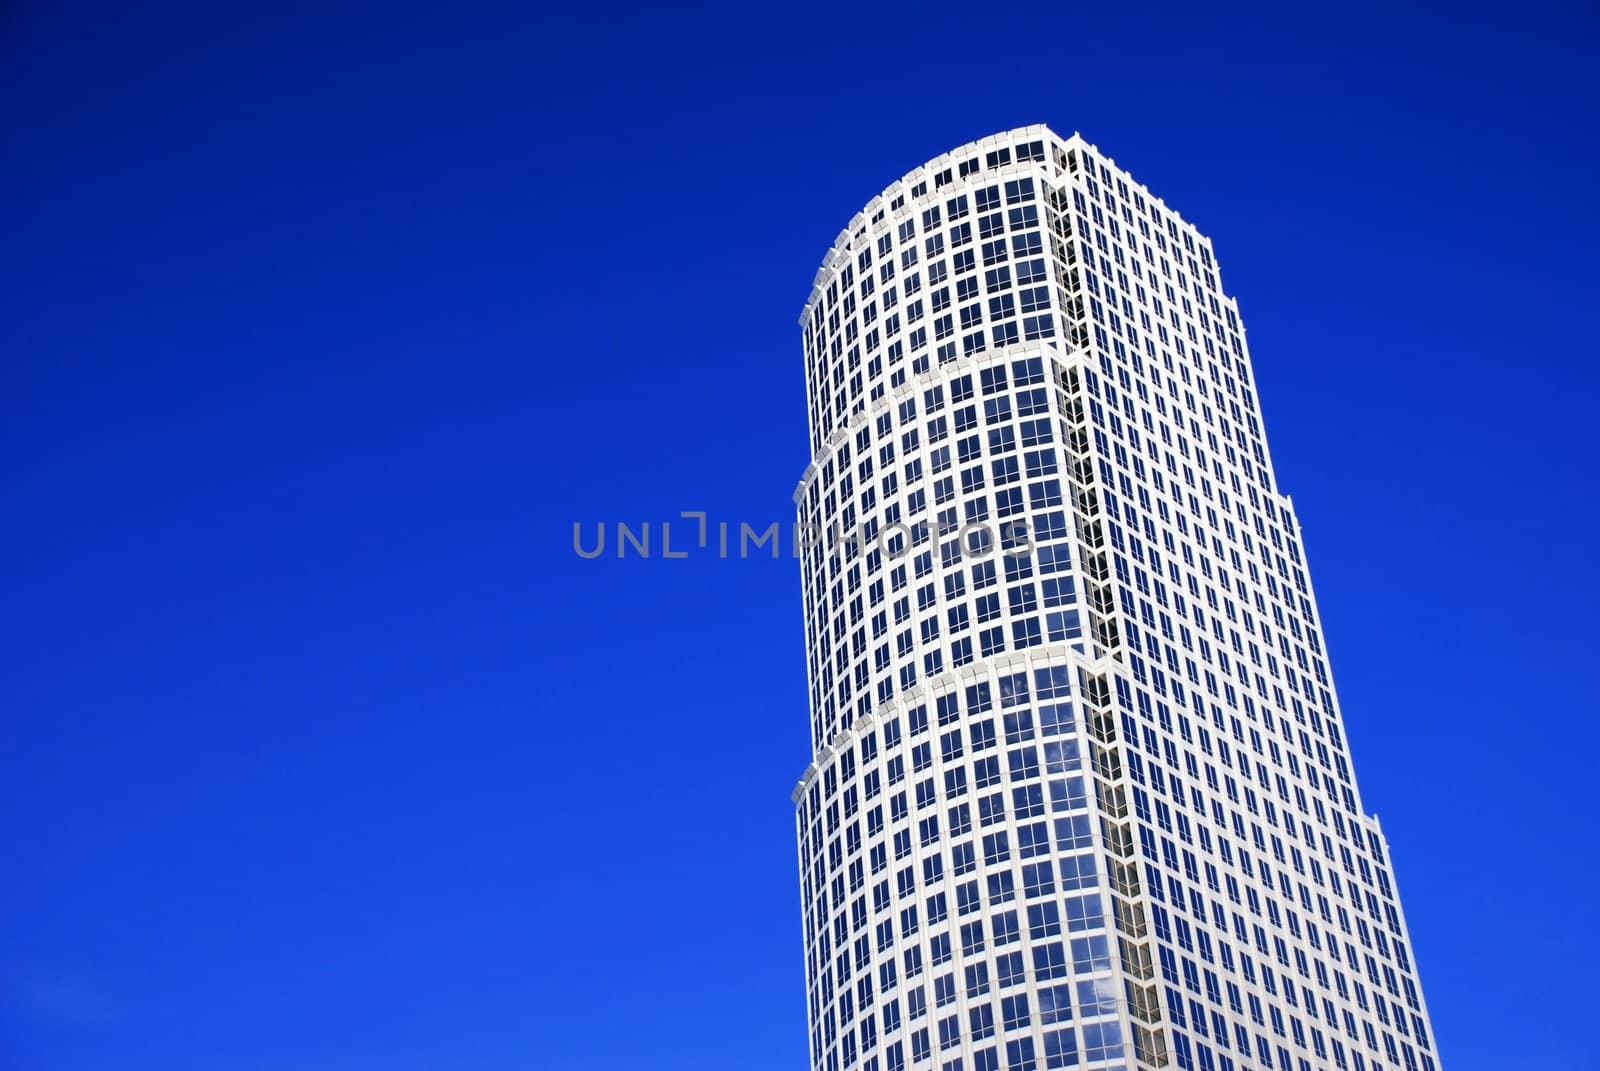 Los Angeles Skyscraper and Sky by pixelsnap